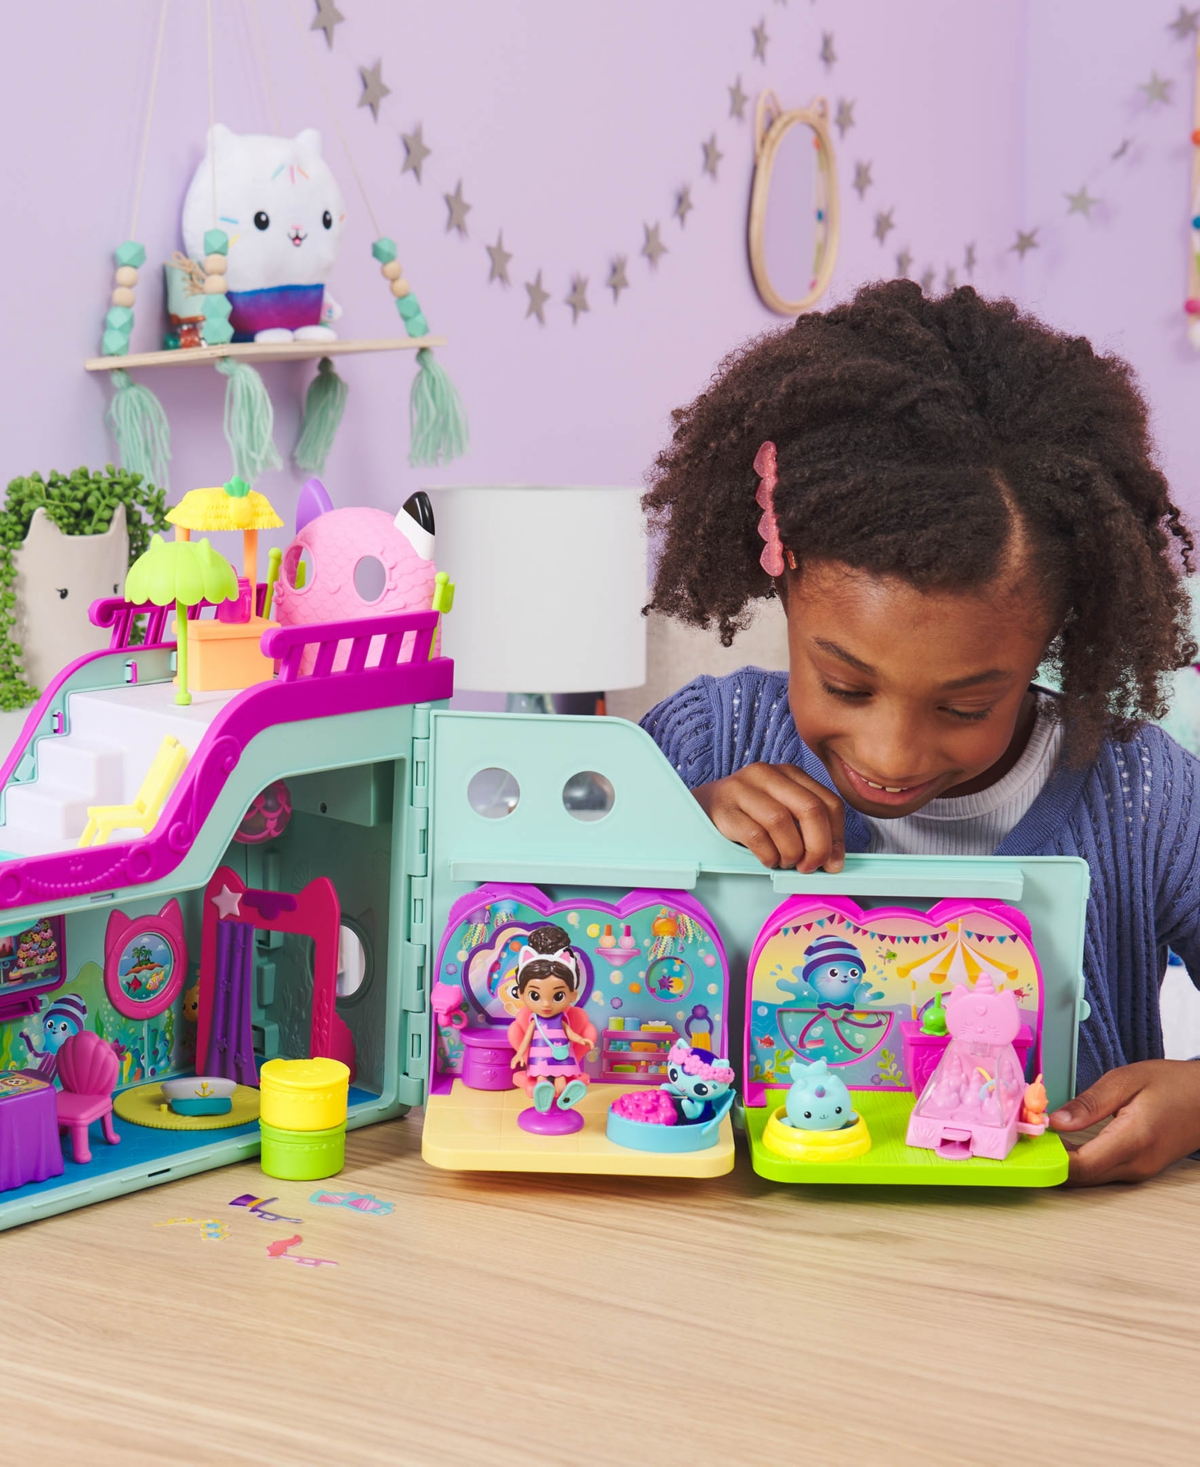 Shop Gabby's Dollhouse Dreamworks, Mercat's Spa Room Playset, With Mercat Toy Figure, Surprise Toys And Dollhouse Furniture In Multi-color